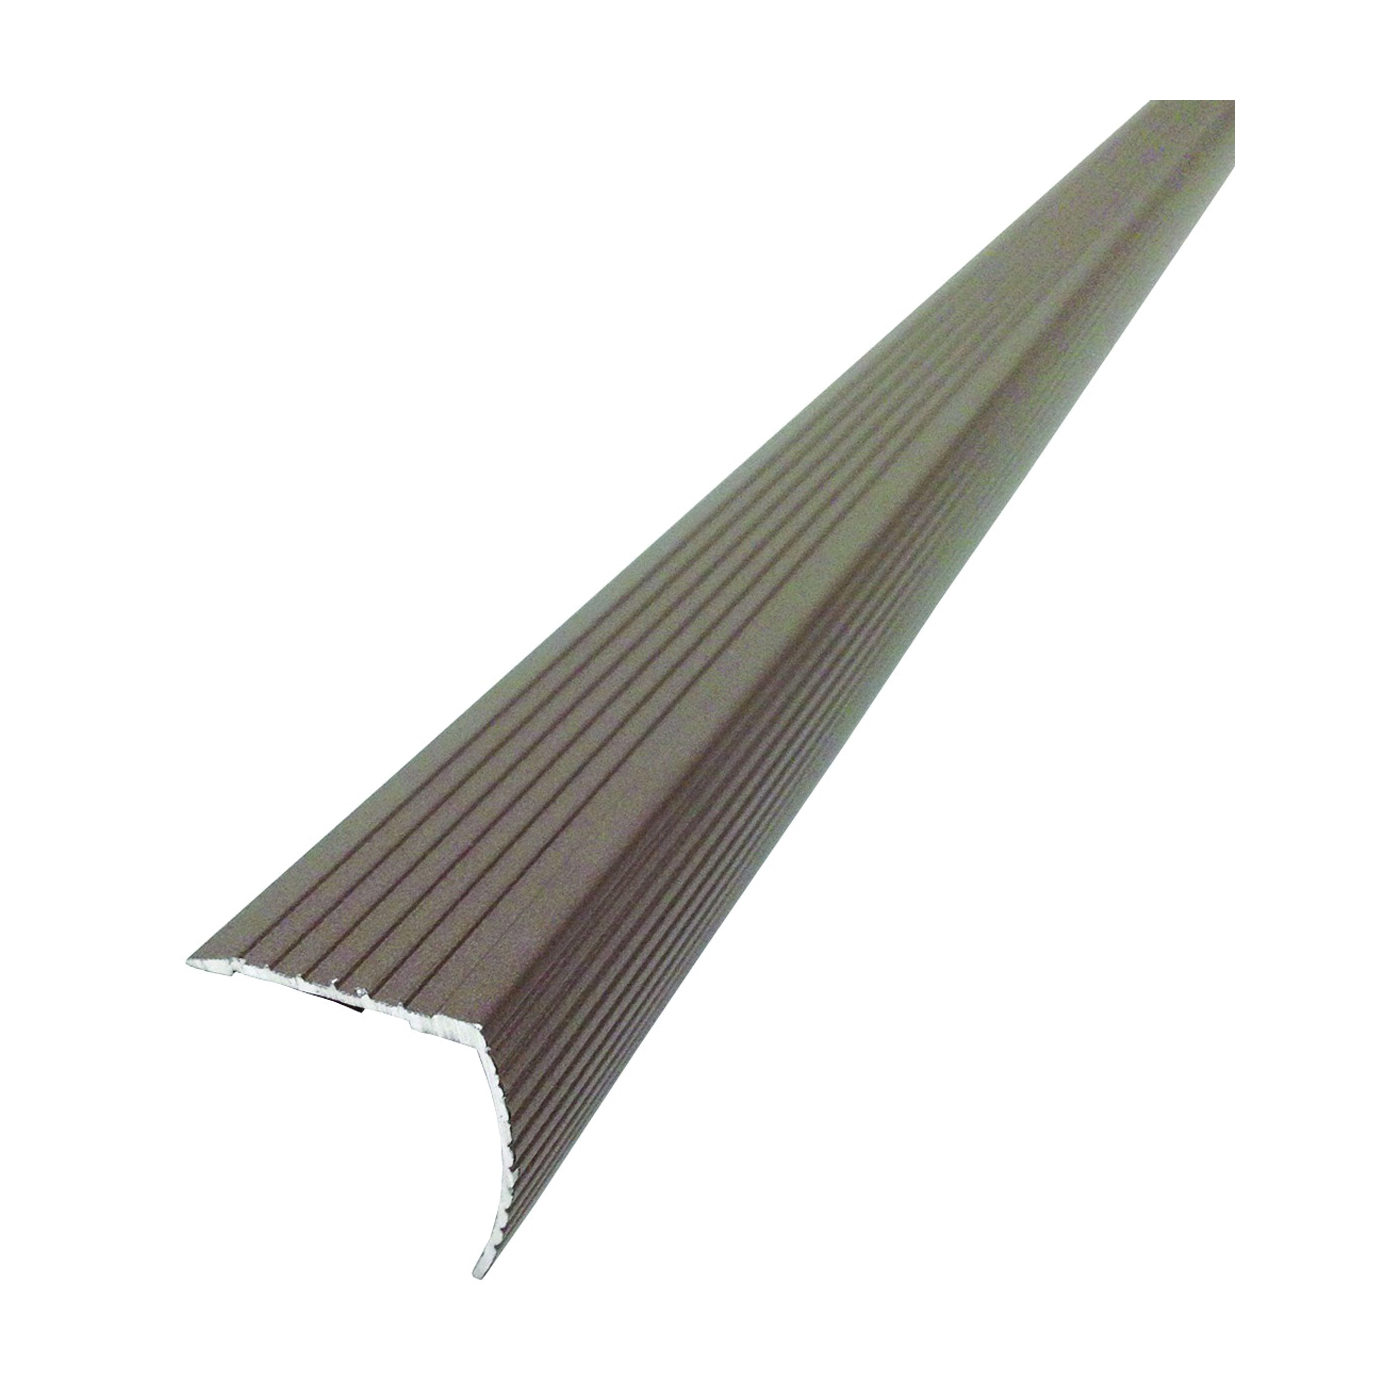 43311 Fluted Stair Edge, 36 in L, 1.22 in W, Metal, Spice